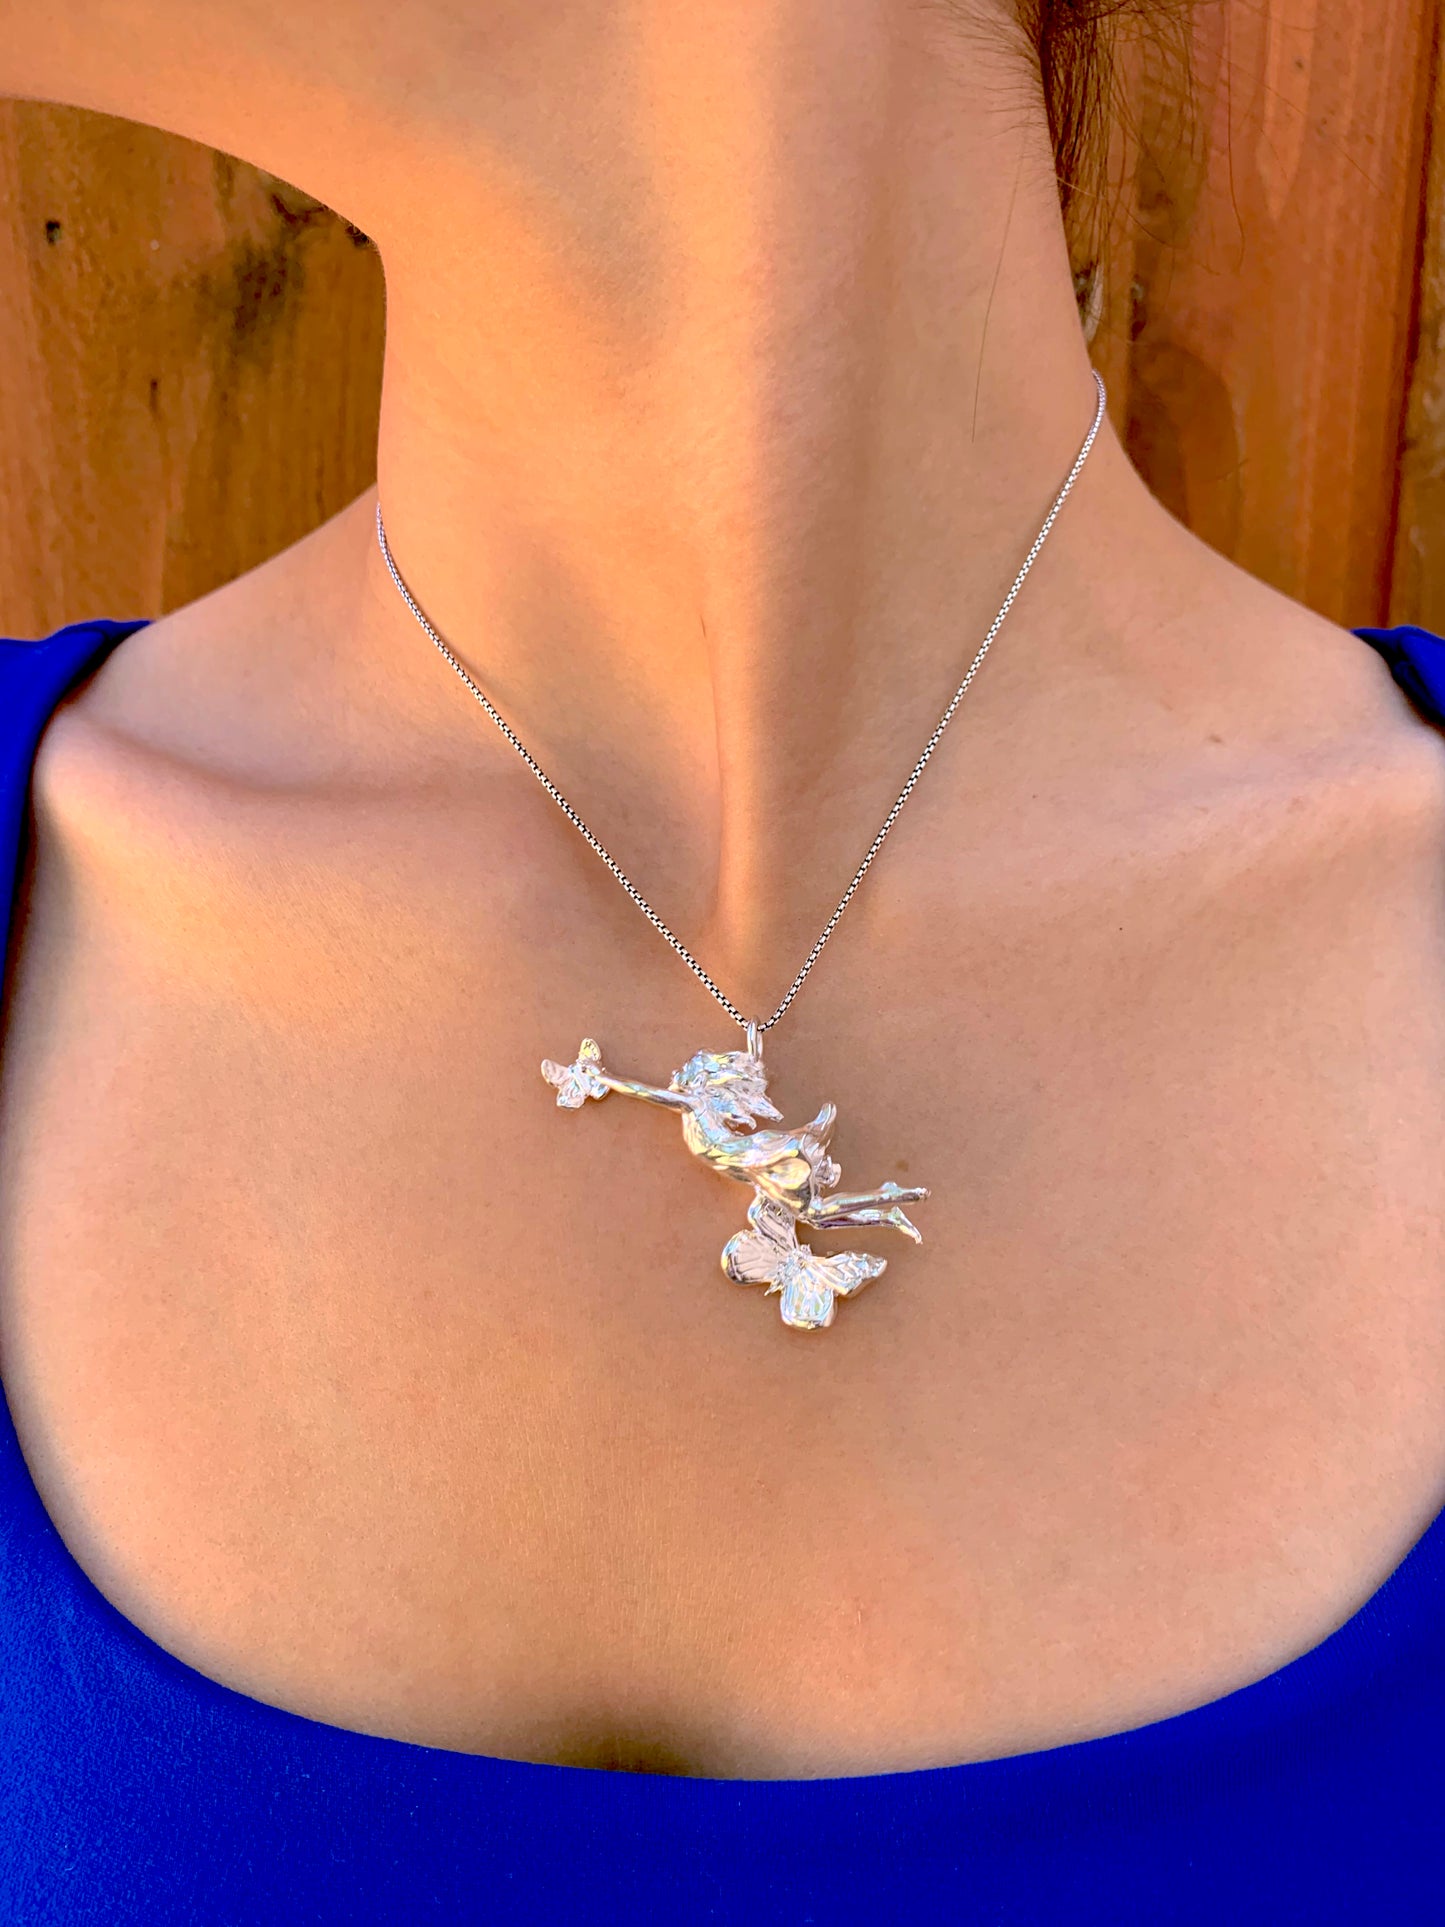 "Lift Her with Butterflies" Pendant Necklace - Sterling Silver